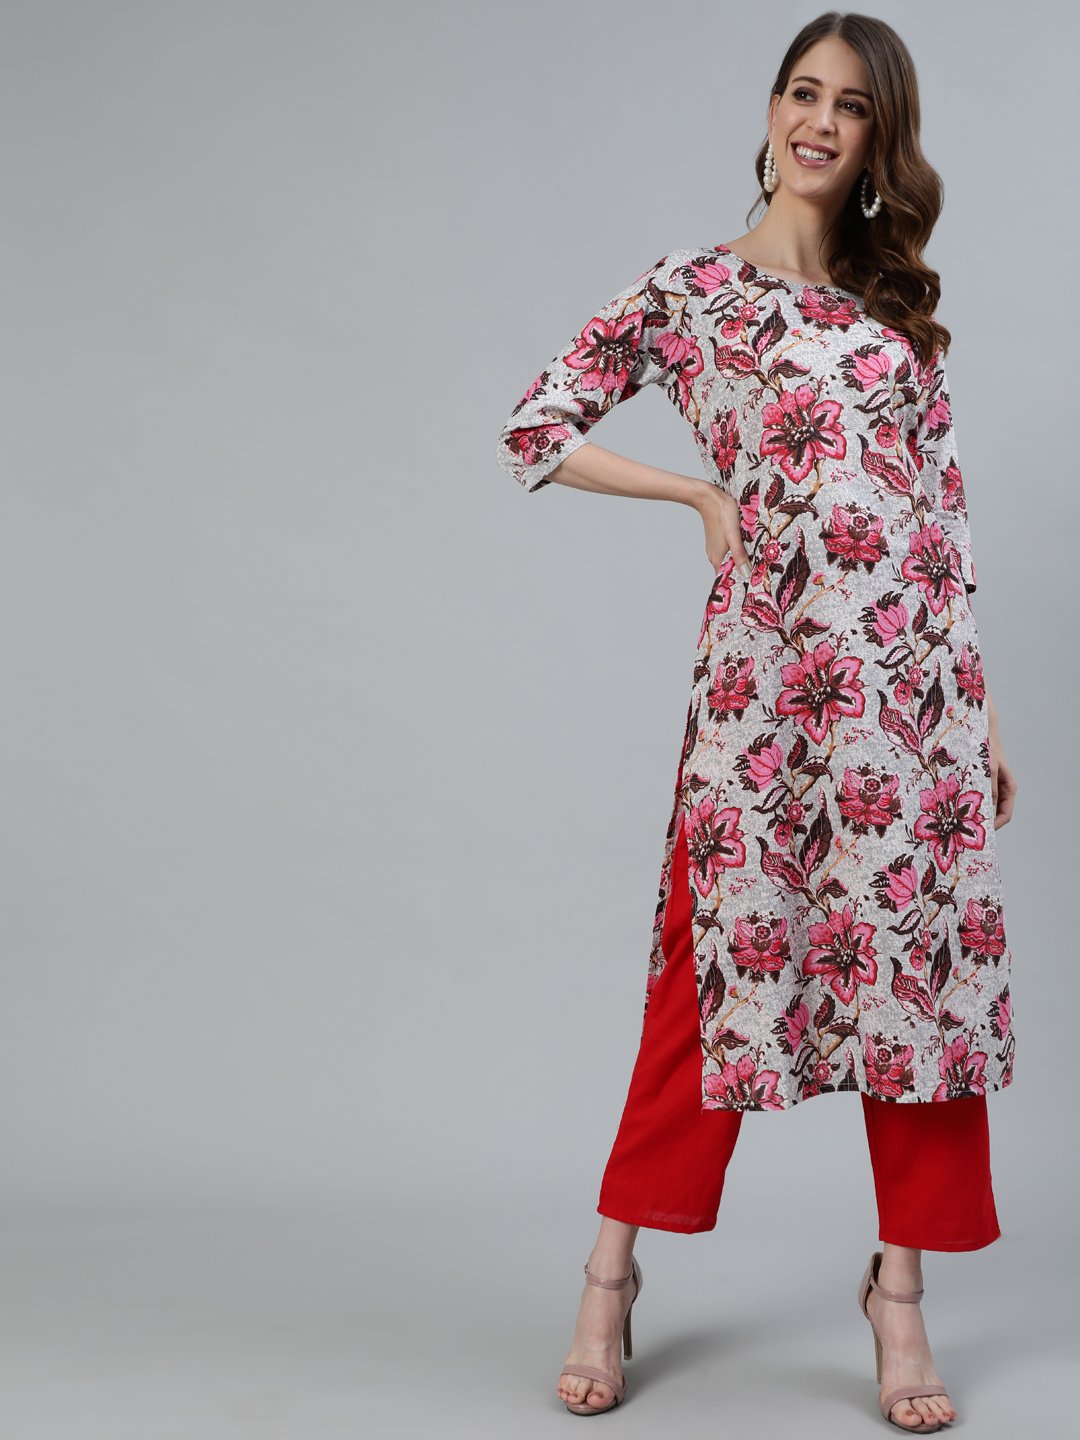 Women's Off- White Floral Printed Straight Kurta With Three Quarter Sleeves - Nayo Clothing